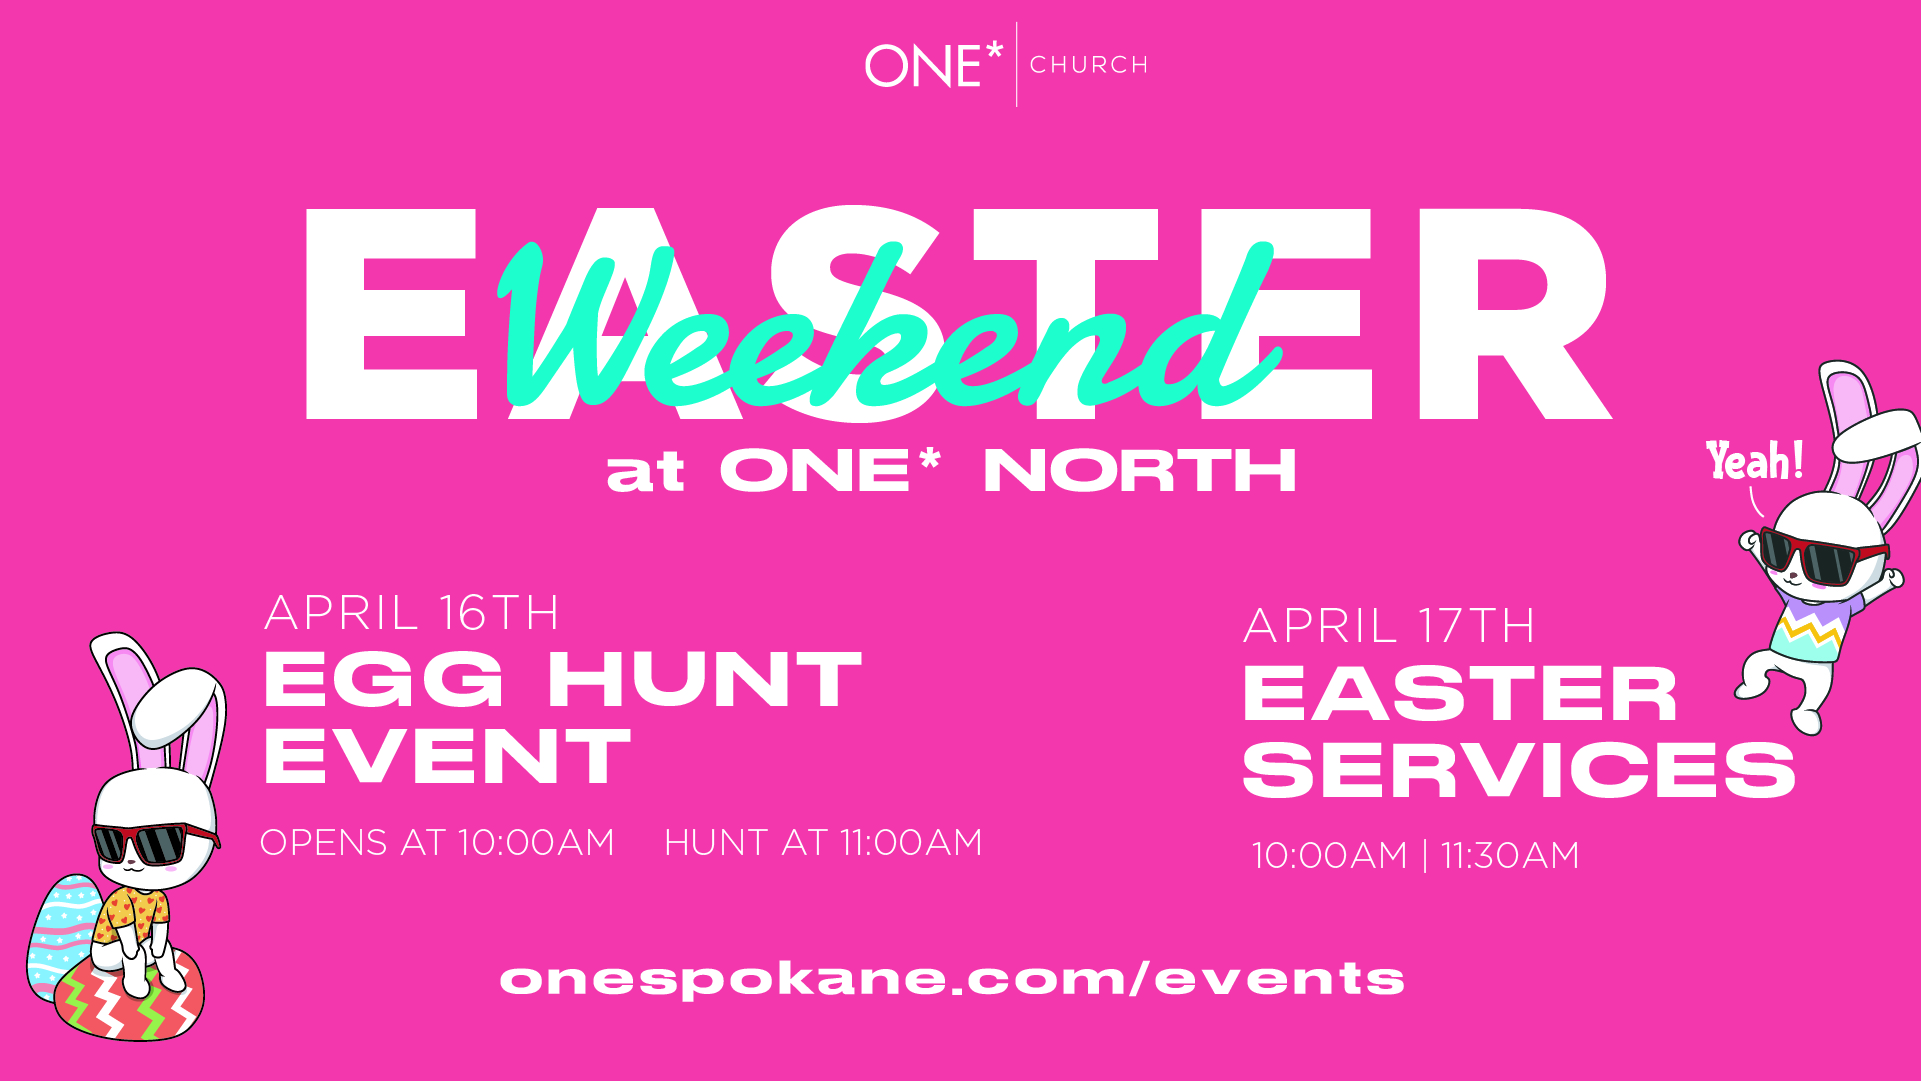 ONE* Easter at North